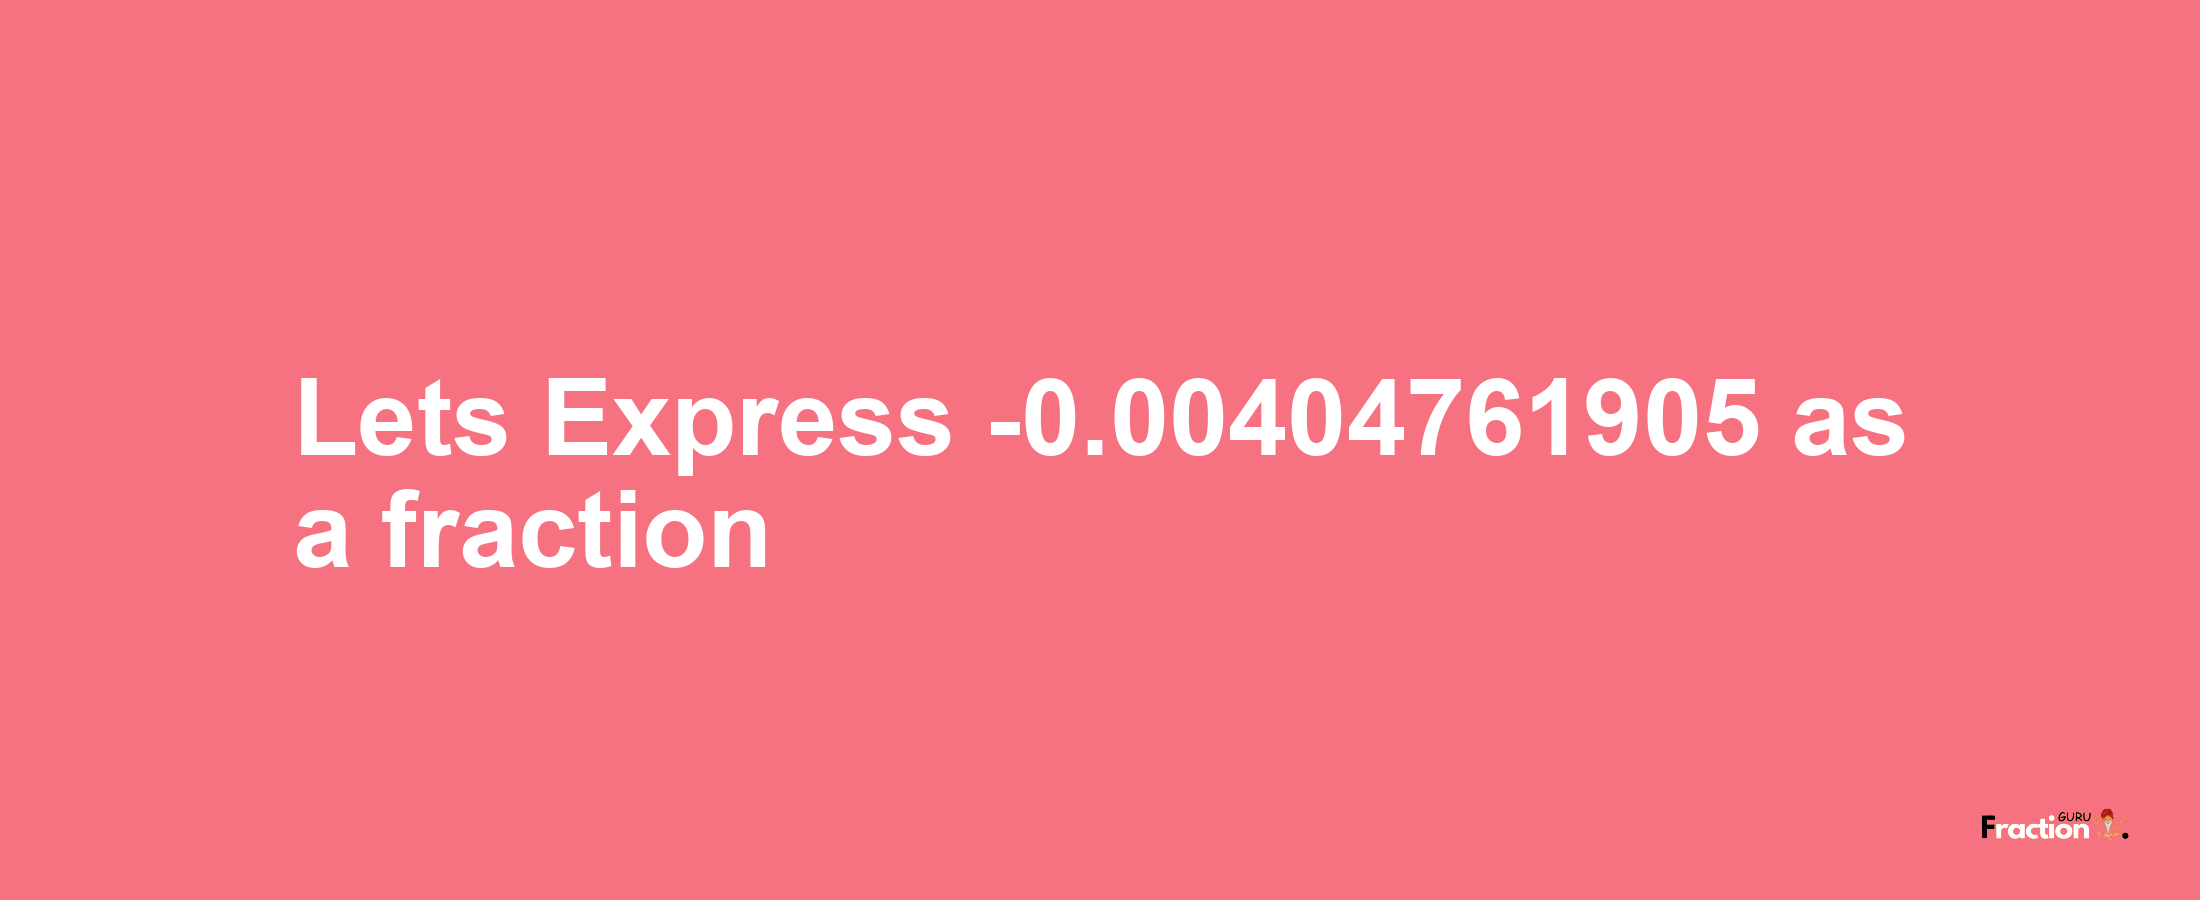 Lets Express -0.00404761905 as afraction